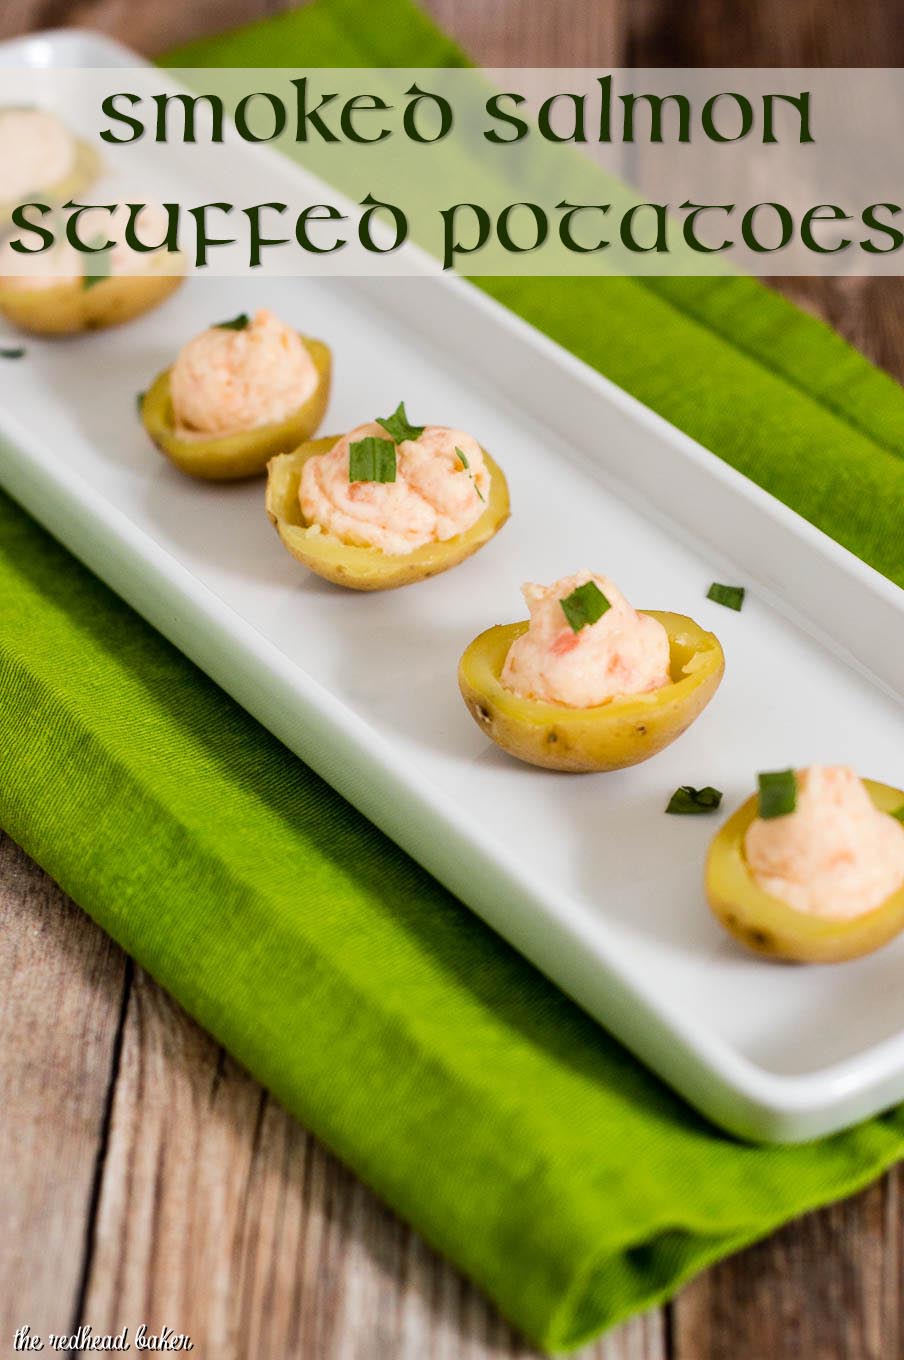 Celebrate St. Patrick's Day with smoked salmon stuffed potatoes. These appetizers are little pots of gold stuffed with delicious filling! #ProgressiveEats